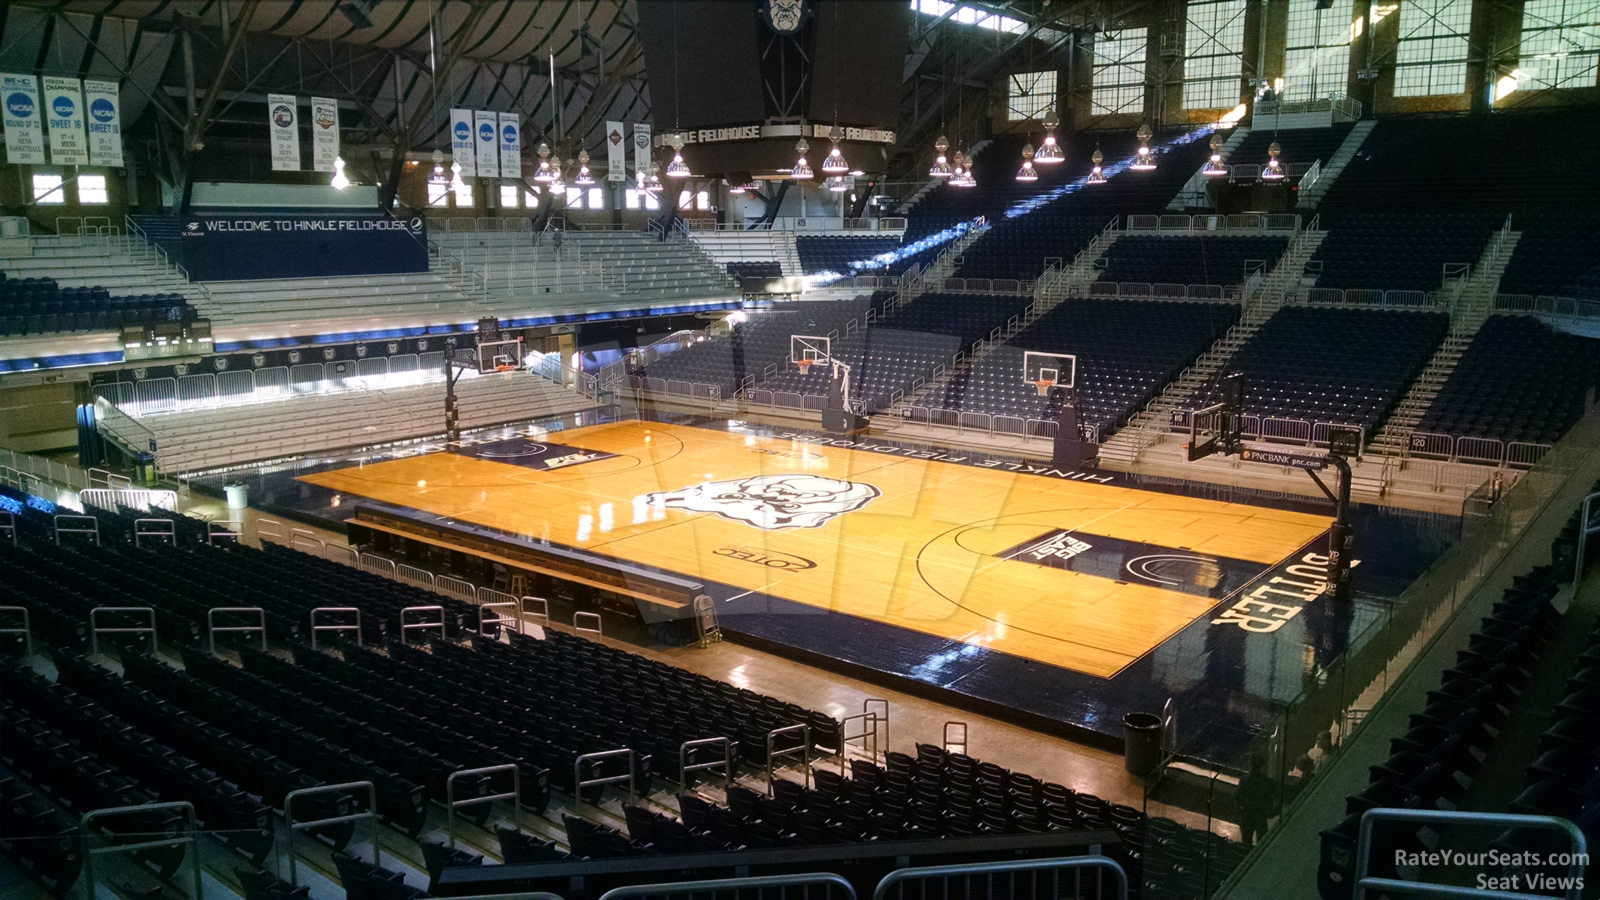 section 203, row 7 seat view  - hinkle fieldhouse